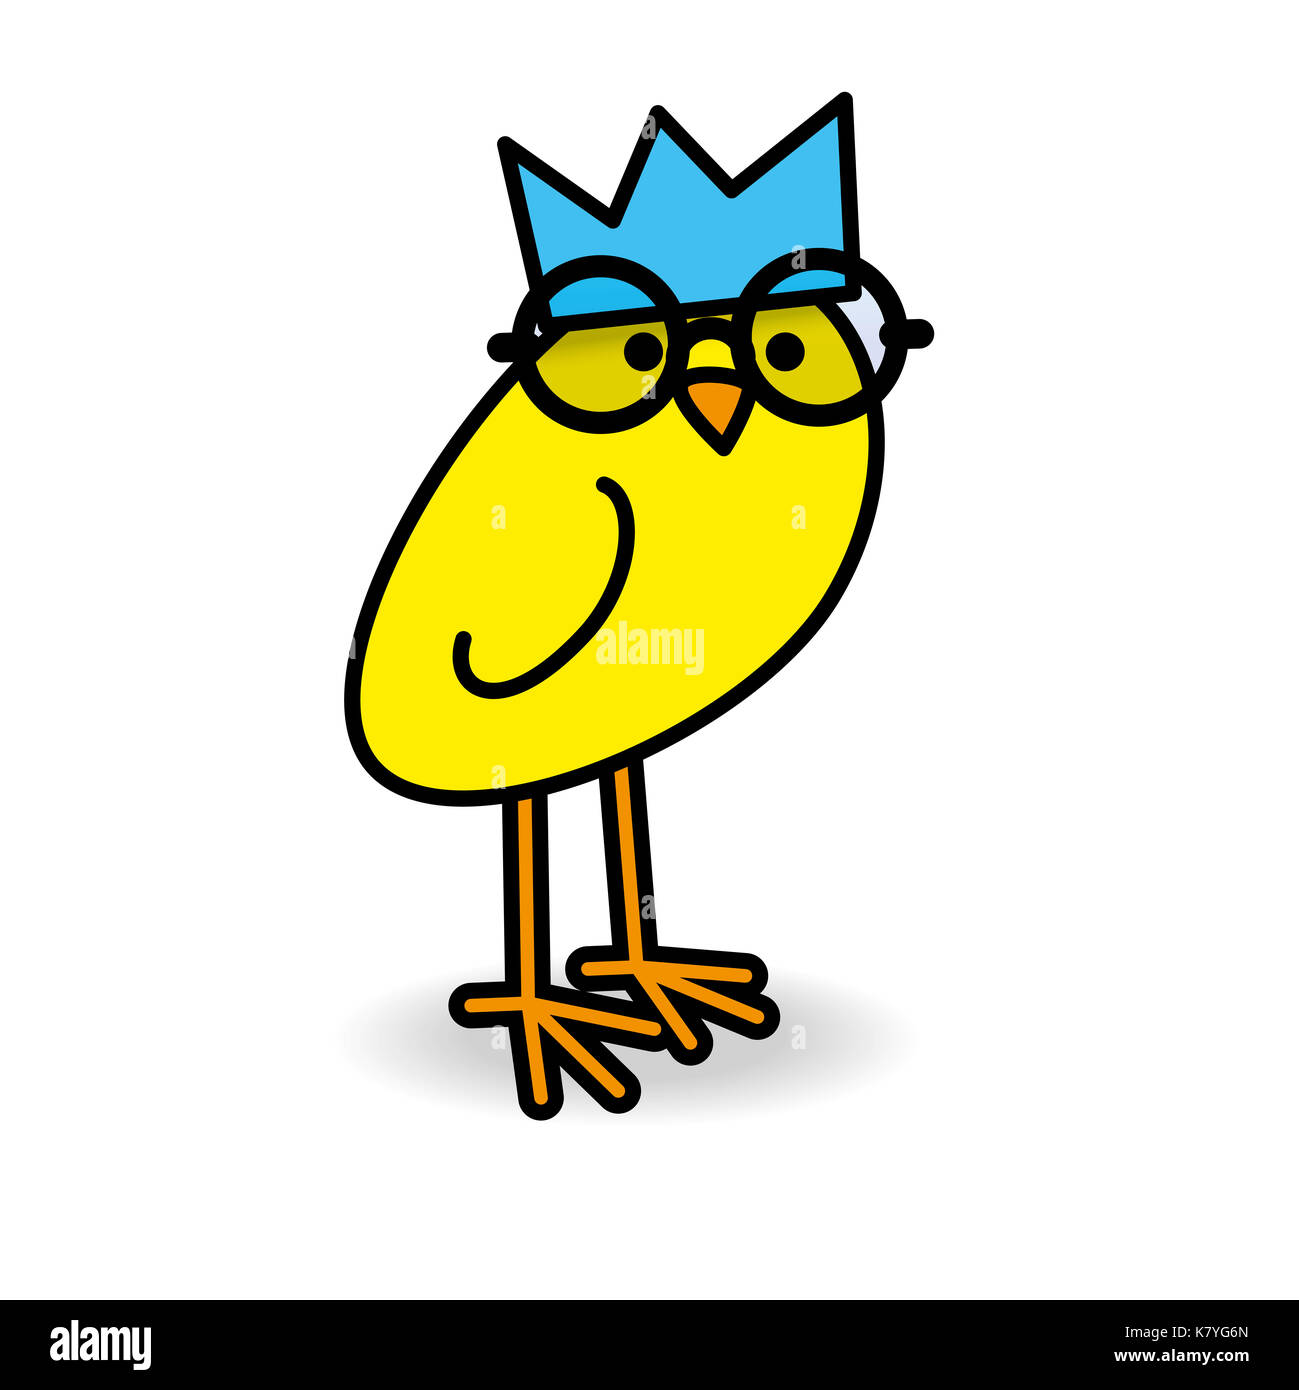 Single Yellow Chick Wearing Blue Party Hat Round Black Rimmed Spectacles Turning Head towards camera on White Background Stock Photo